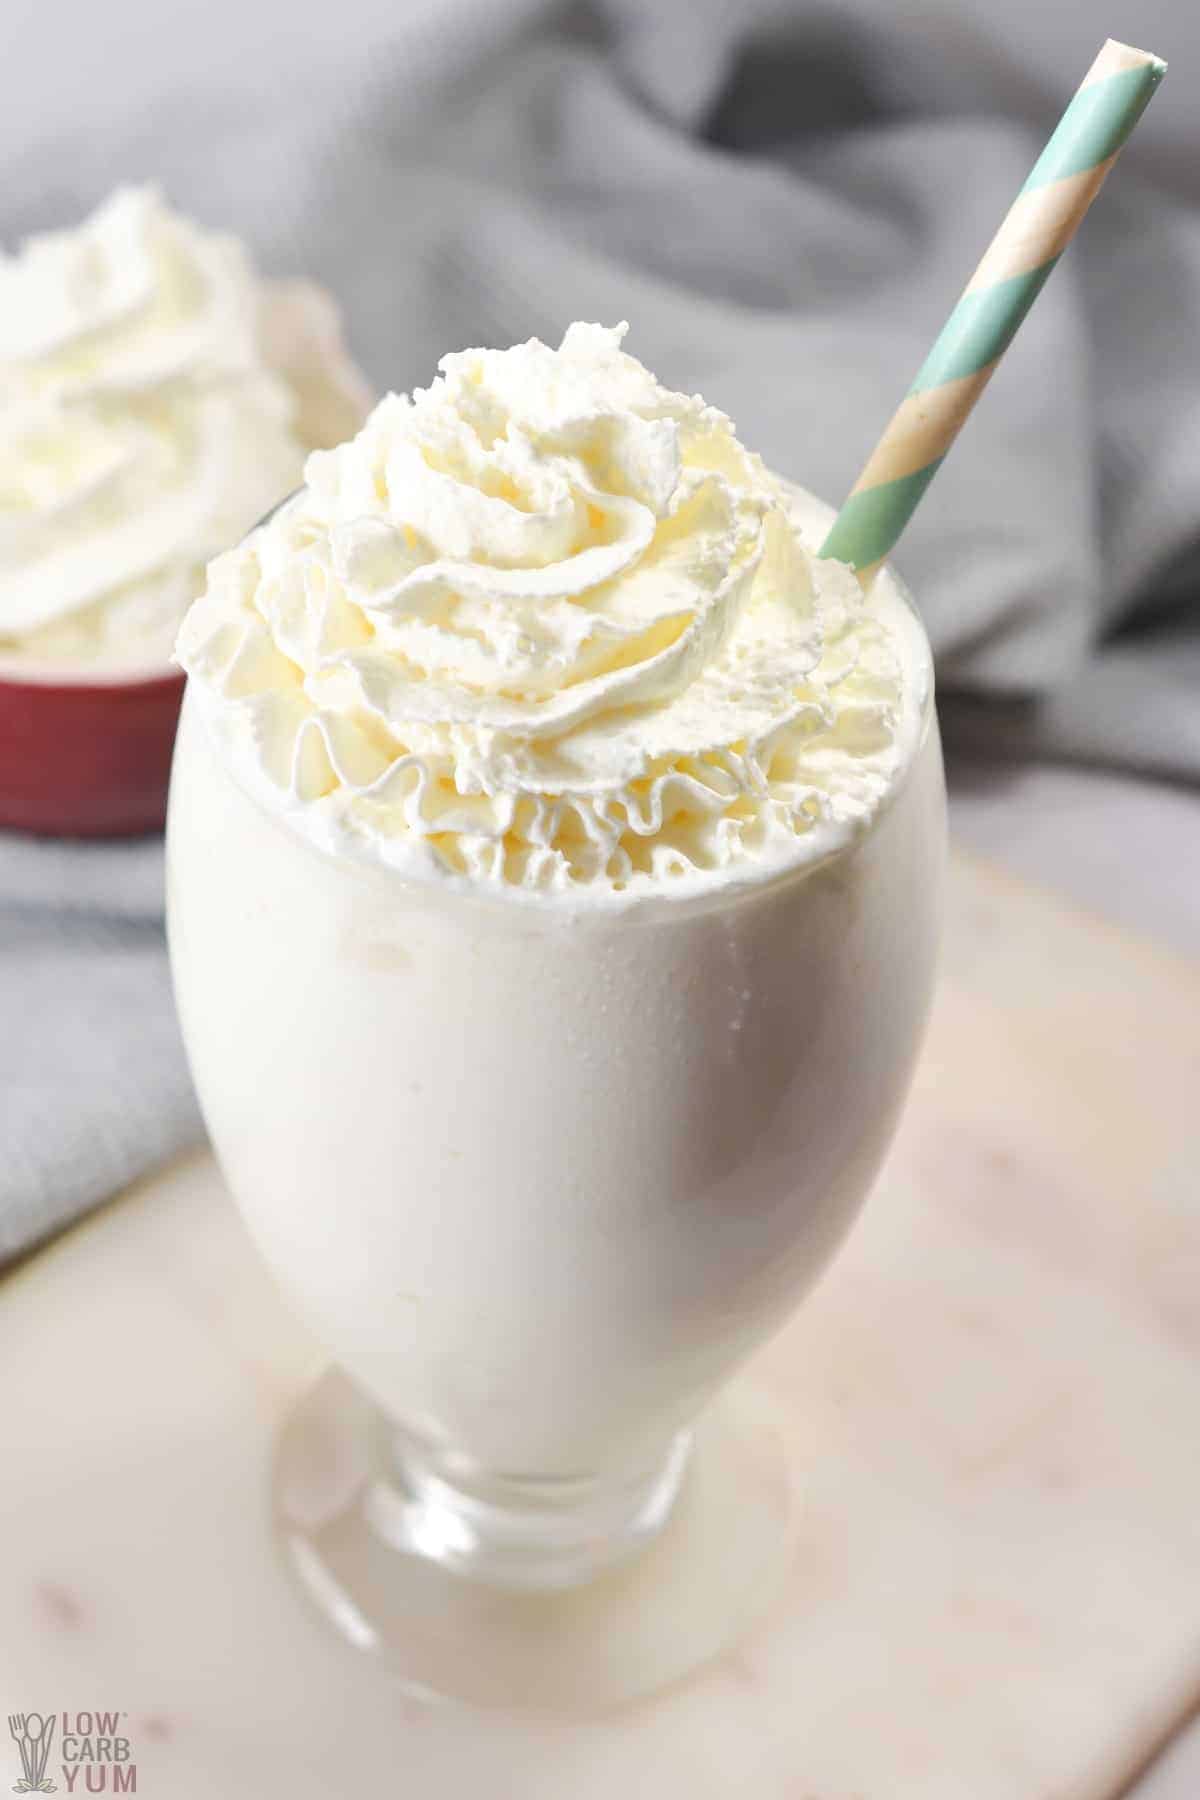 keto frappuccino with whipped cream.